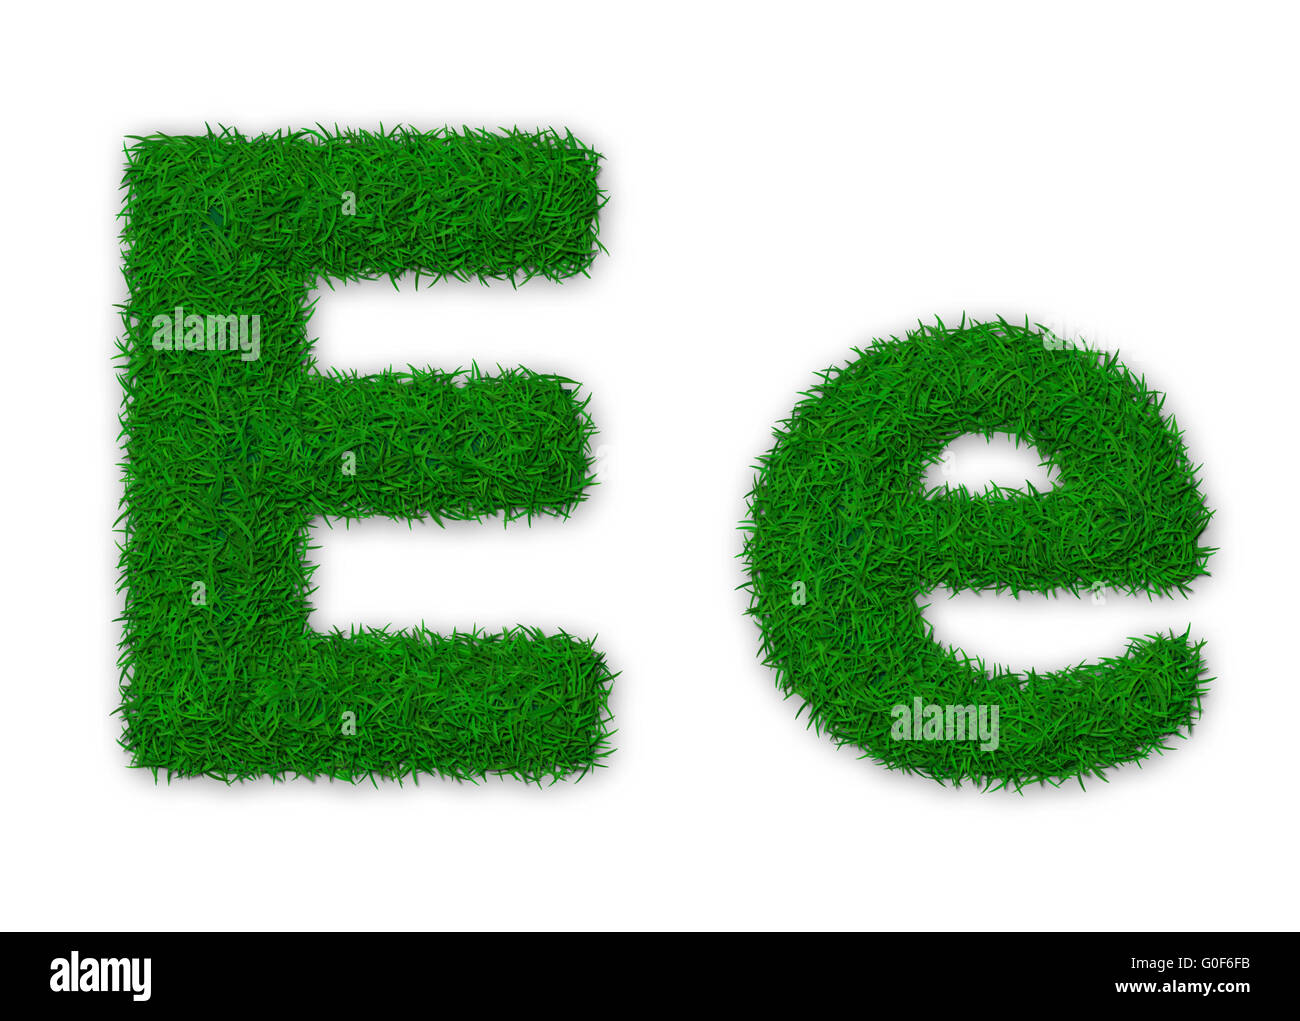 Illustration of capital and lowercase letter E made of grass Stock Photo